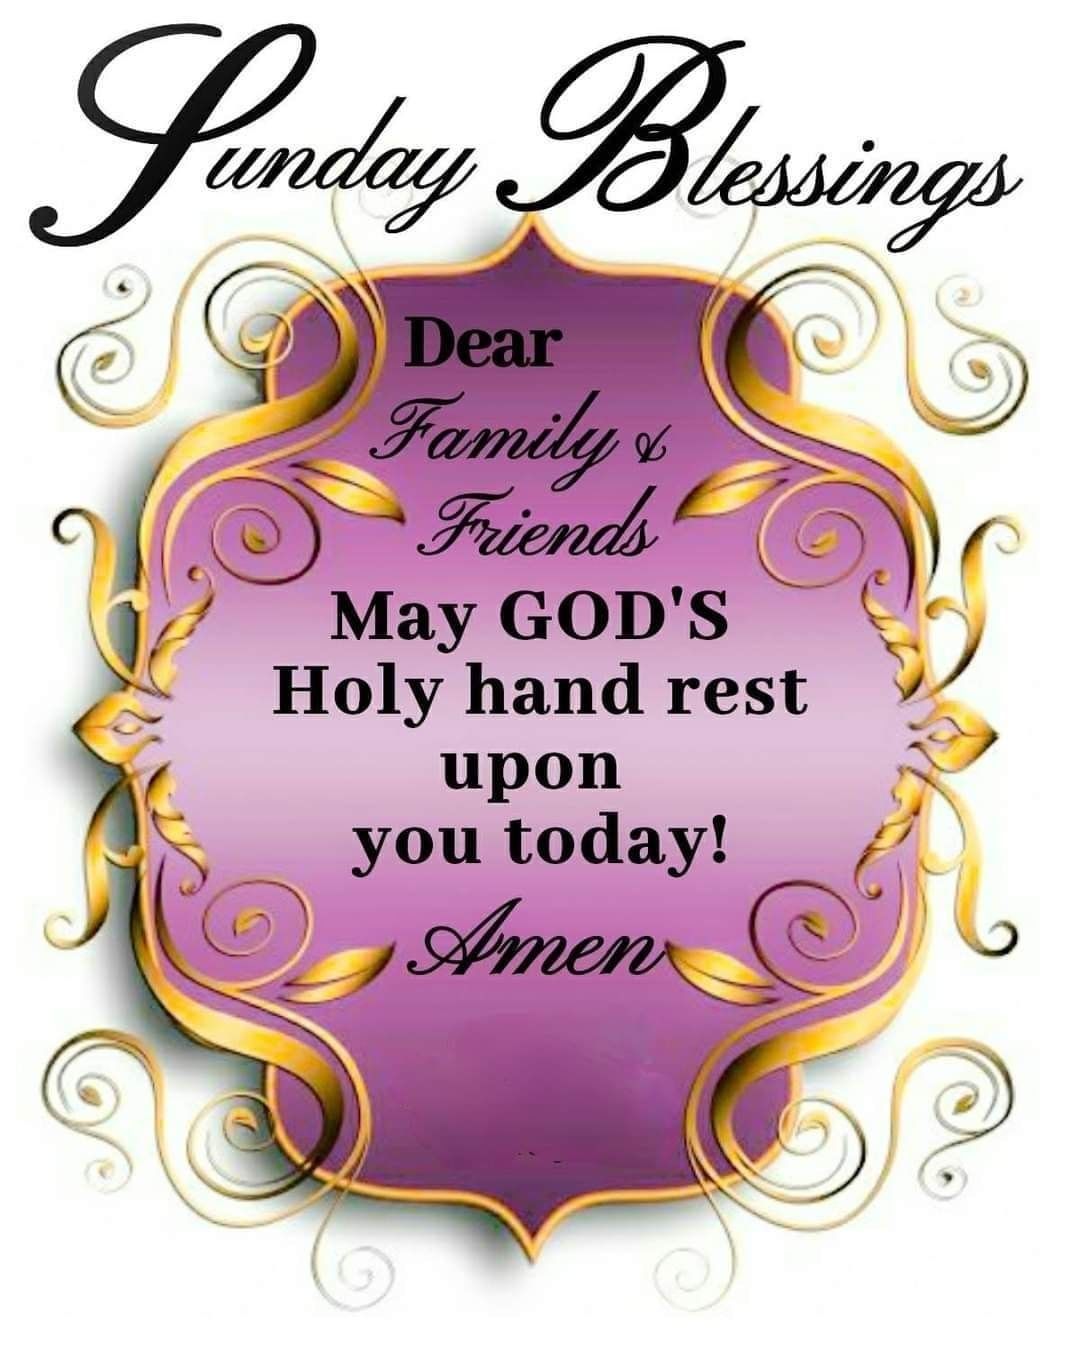 May God's Holy Hand Rest Upon You Today - Sunday Blessings